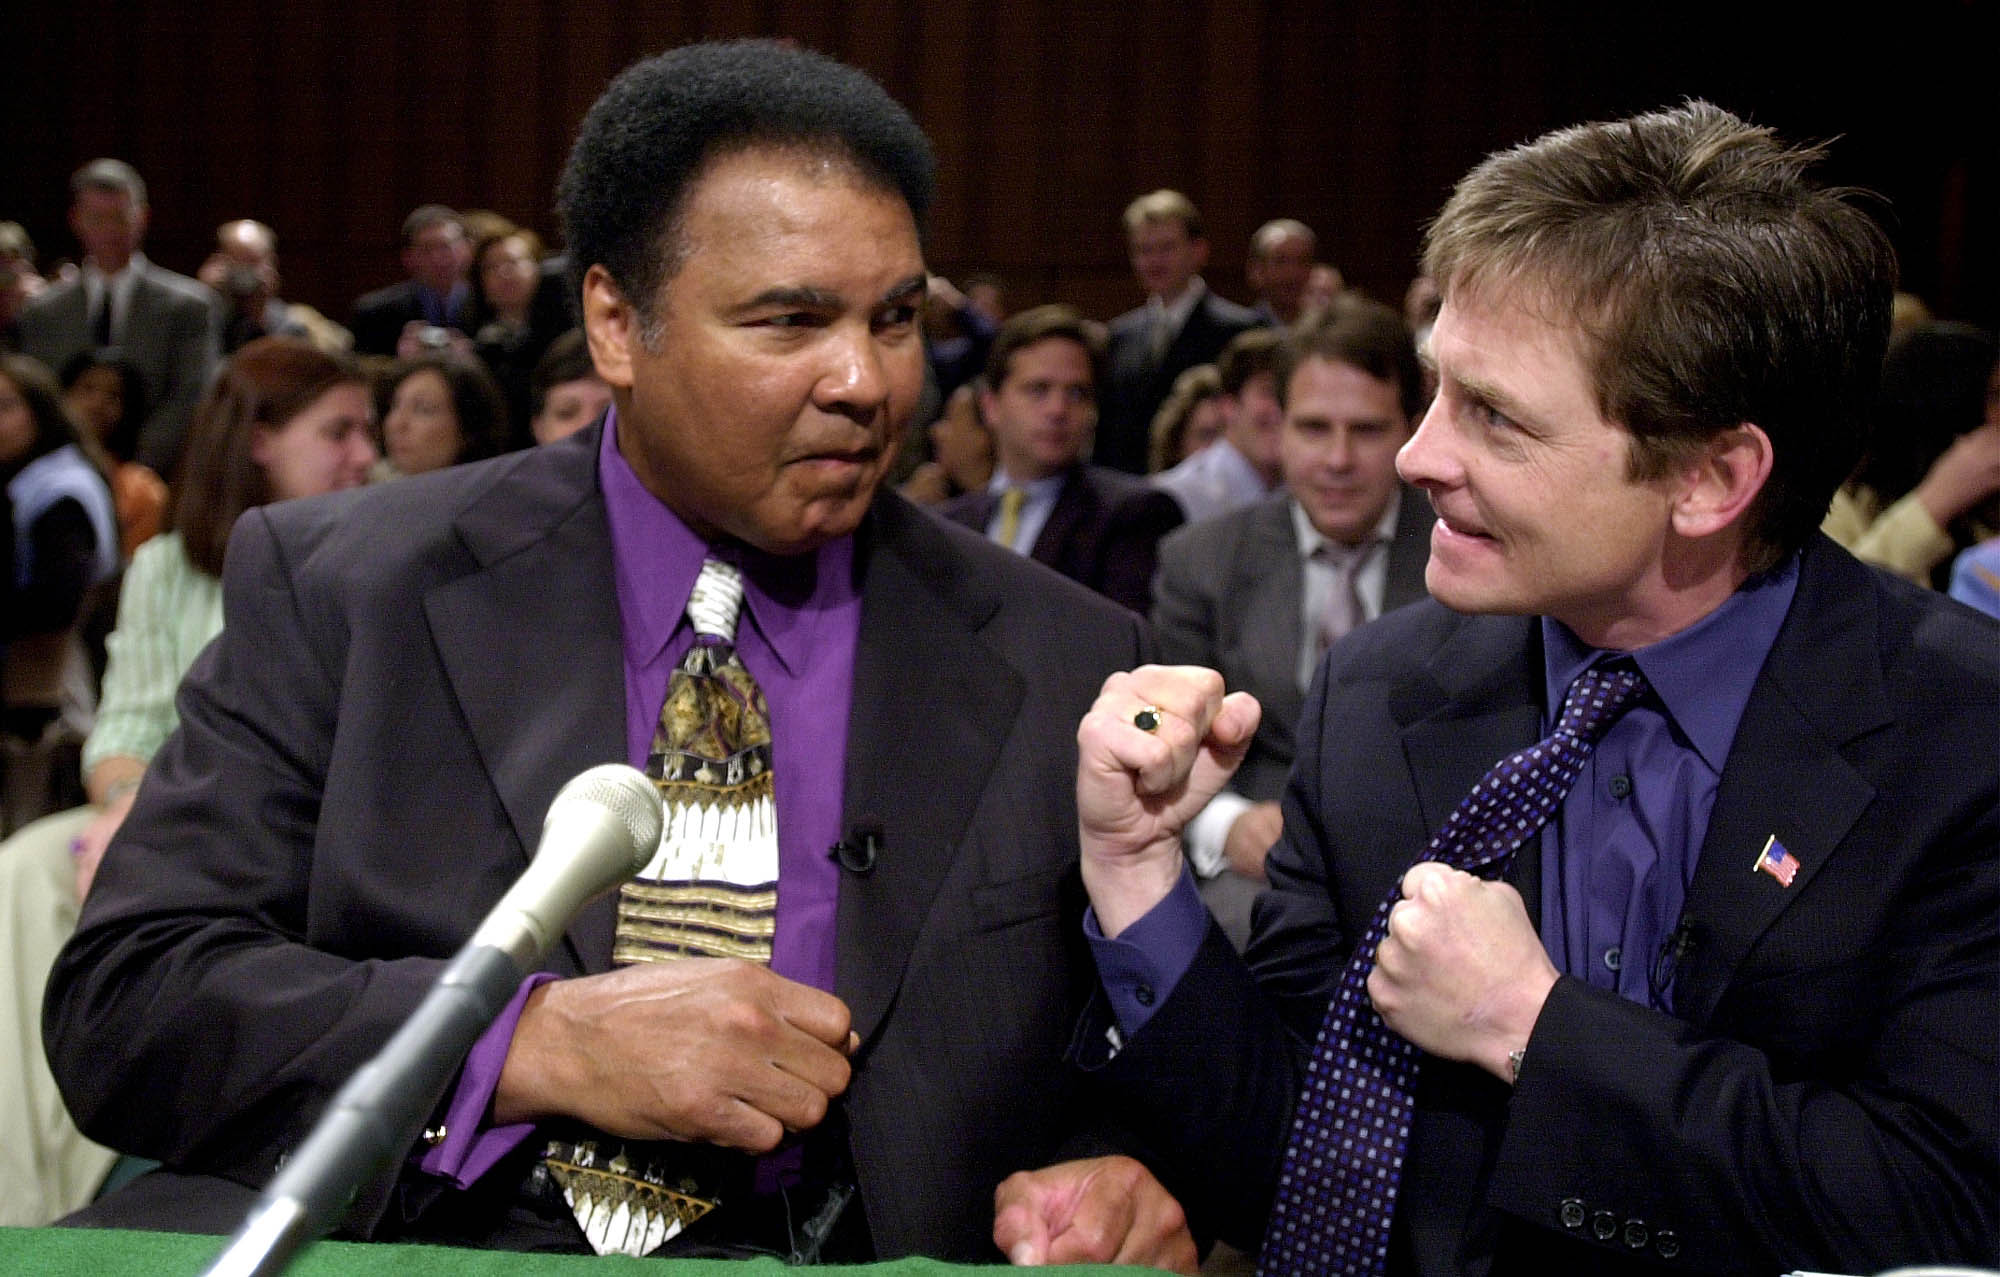 Photo: Boxer Muhammad Ali (left) and actor Michael J. Fox joke around. Ali, a Black man wearing a purple collared shirt, white and gold tie, and black blazer smiles as he jokingly raises his fist towards Fox, a white man wearing a dark purple collared shirt, purple tie, and black blazer. Fox laughs as he raises his own fists towards Ali in a joking way.